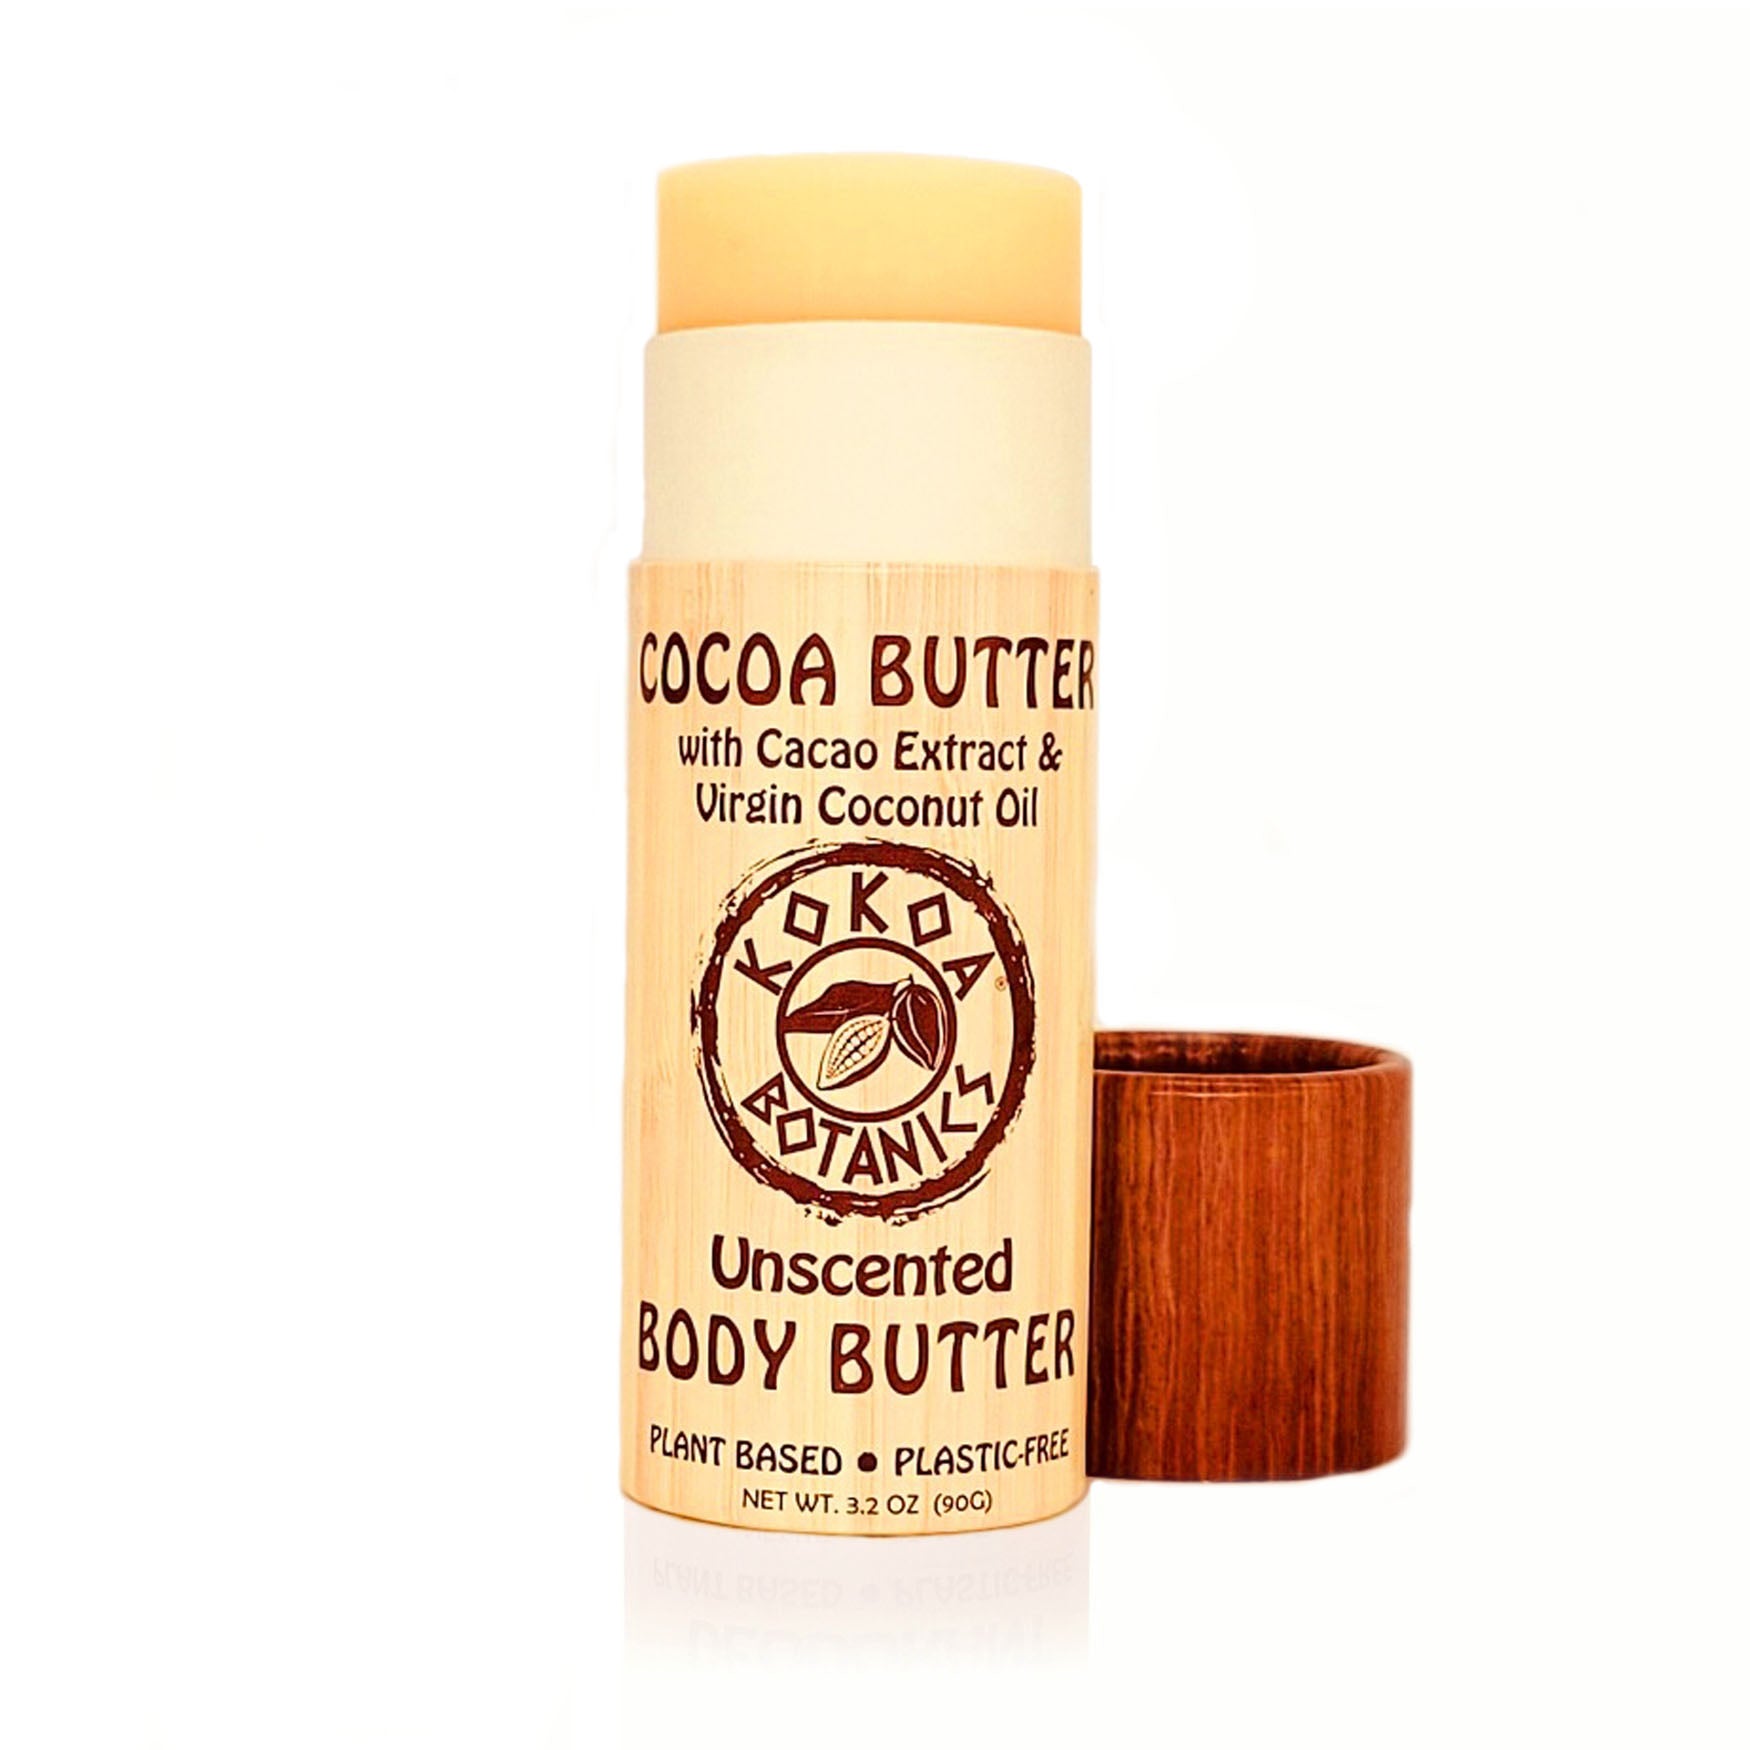 Cocoa Butter Lotion Bar with Virgin Coconut Oil – Unscented – Plastic-Free 3.2 oz